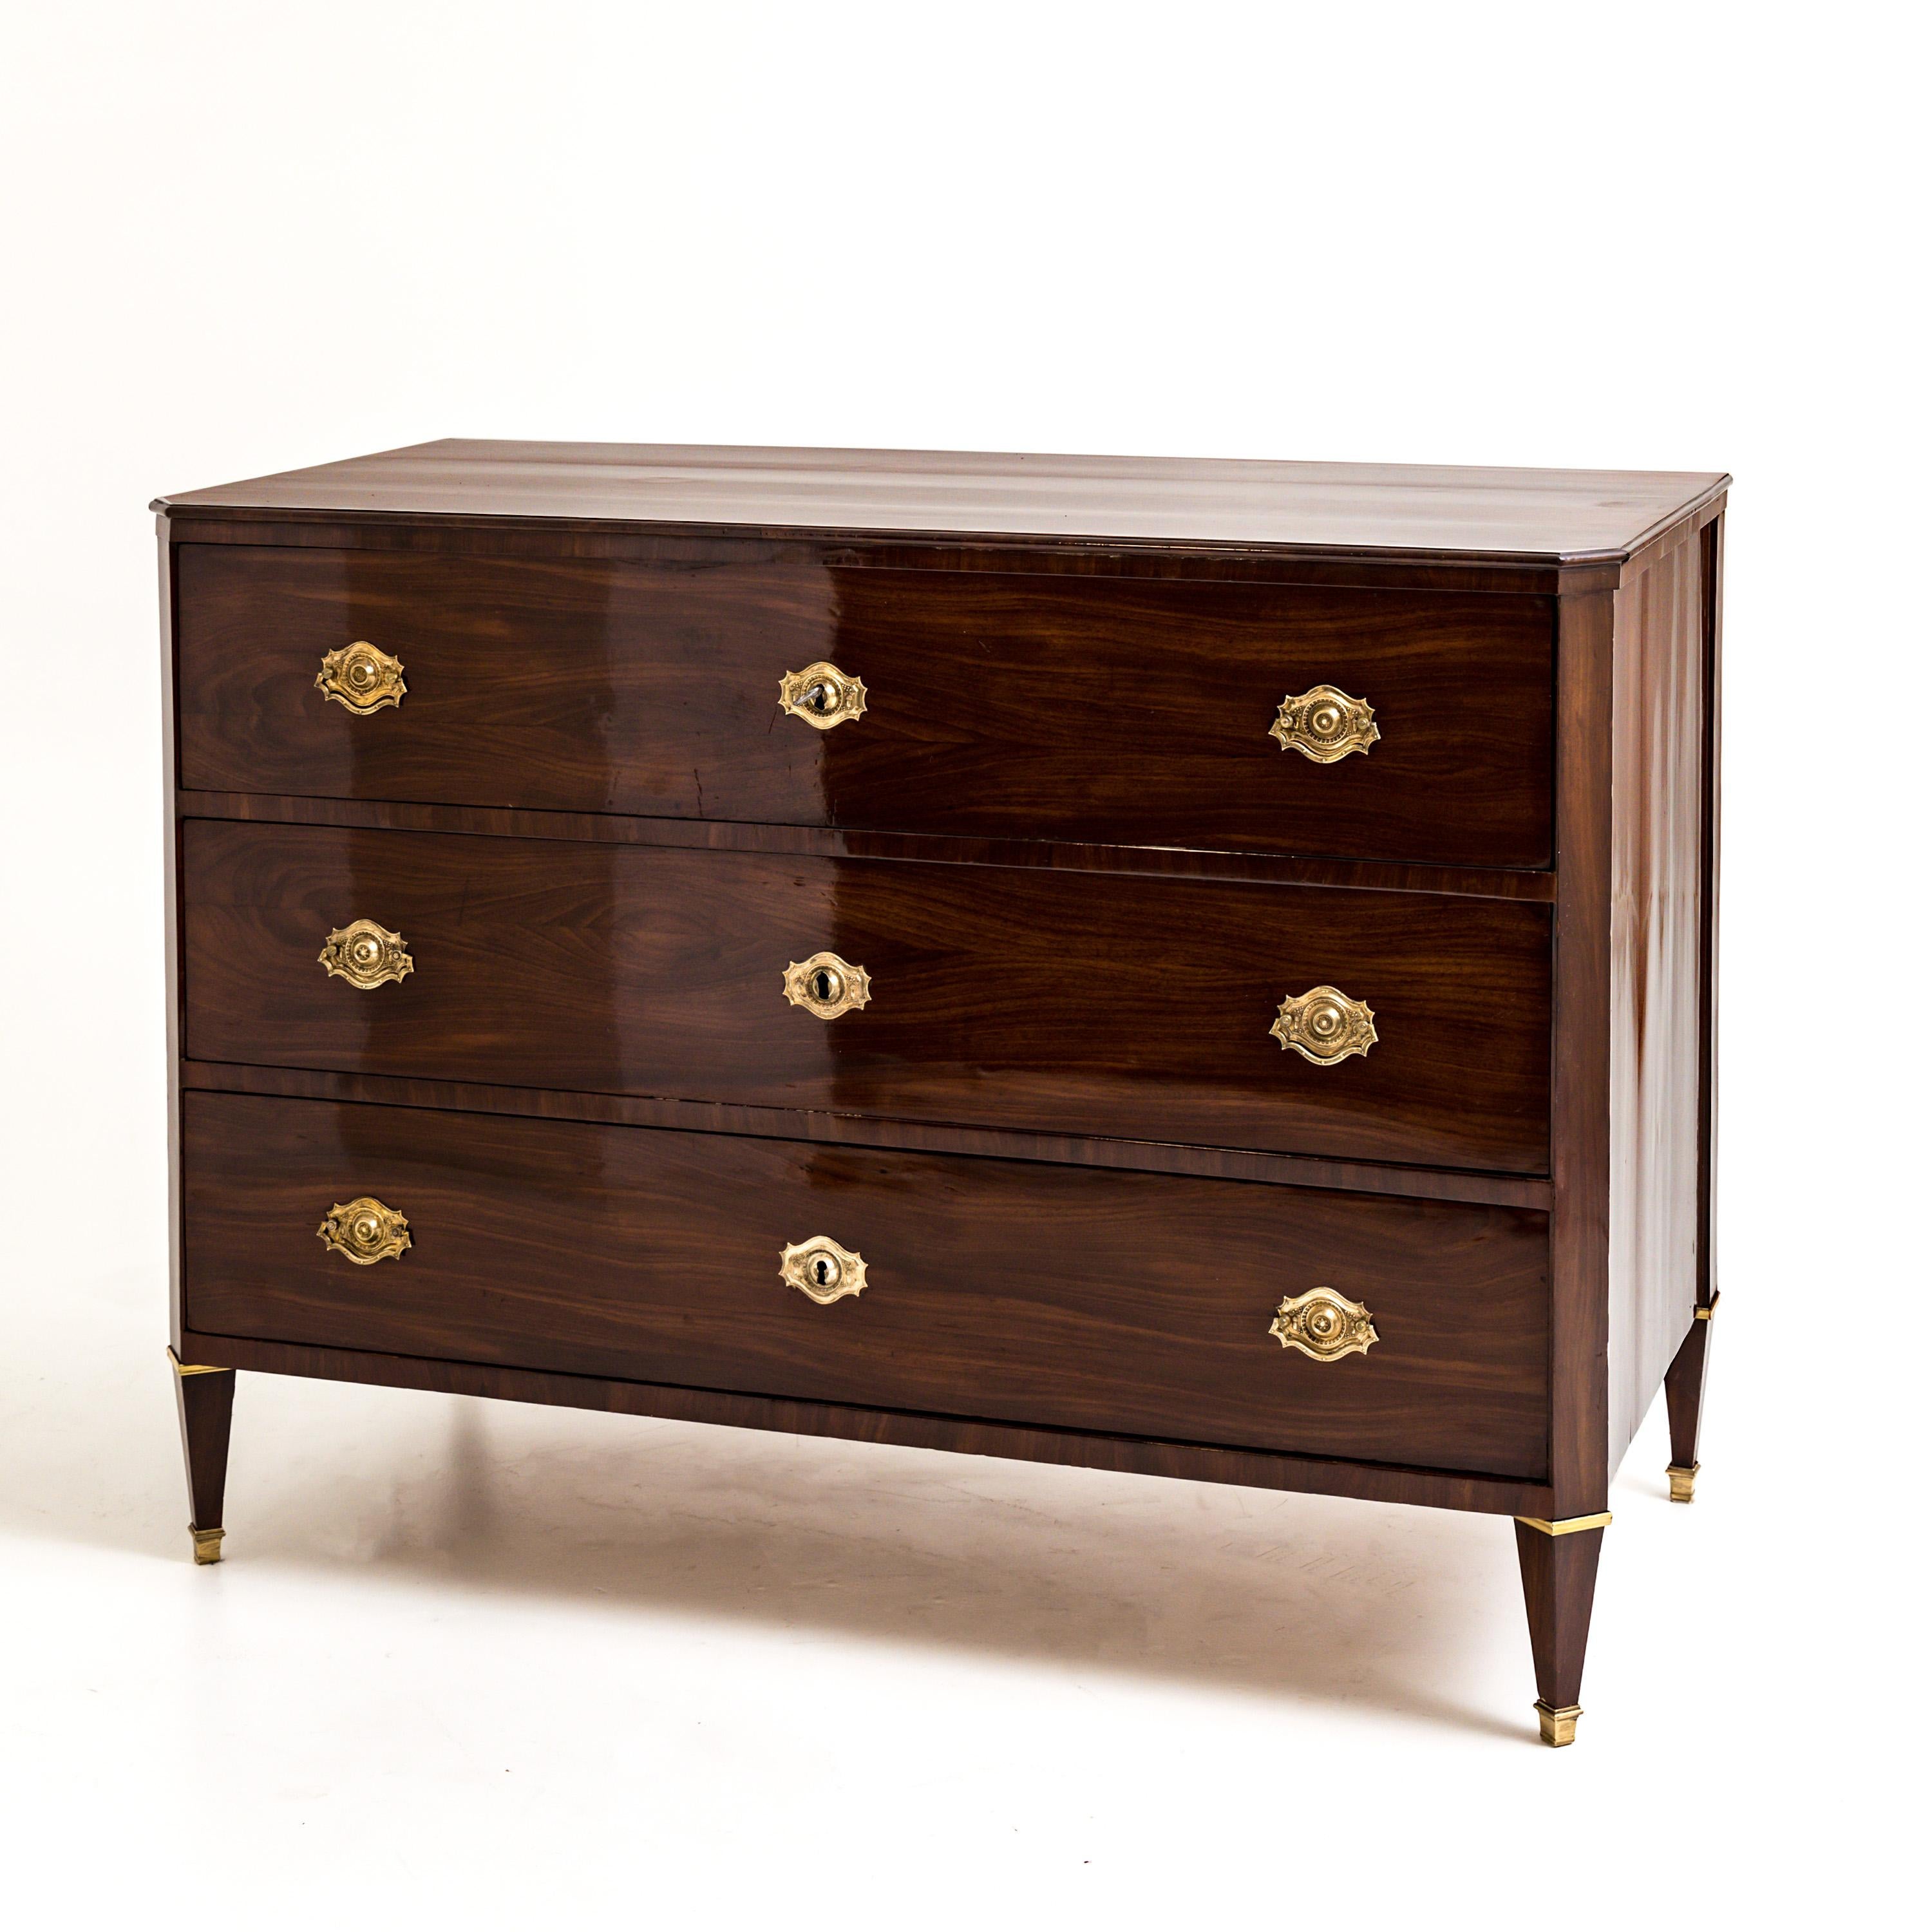 Three-drawer mahogany chest of drawers standing on square-pointed legs with bevelled corners and fire-gilded bronze fittings. The chest of drawers was expertly refurbished and hand polished.